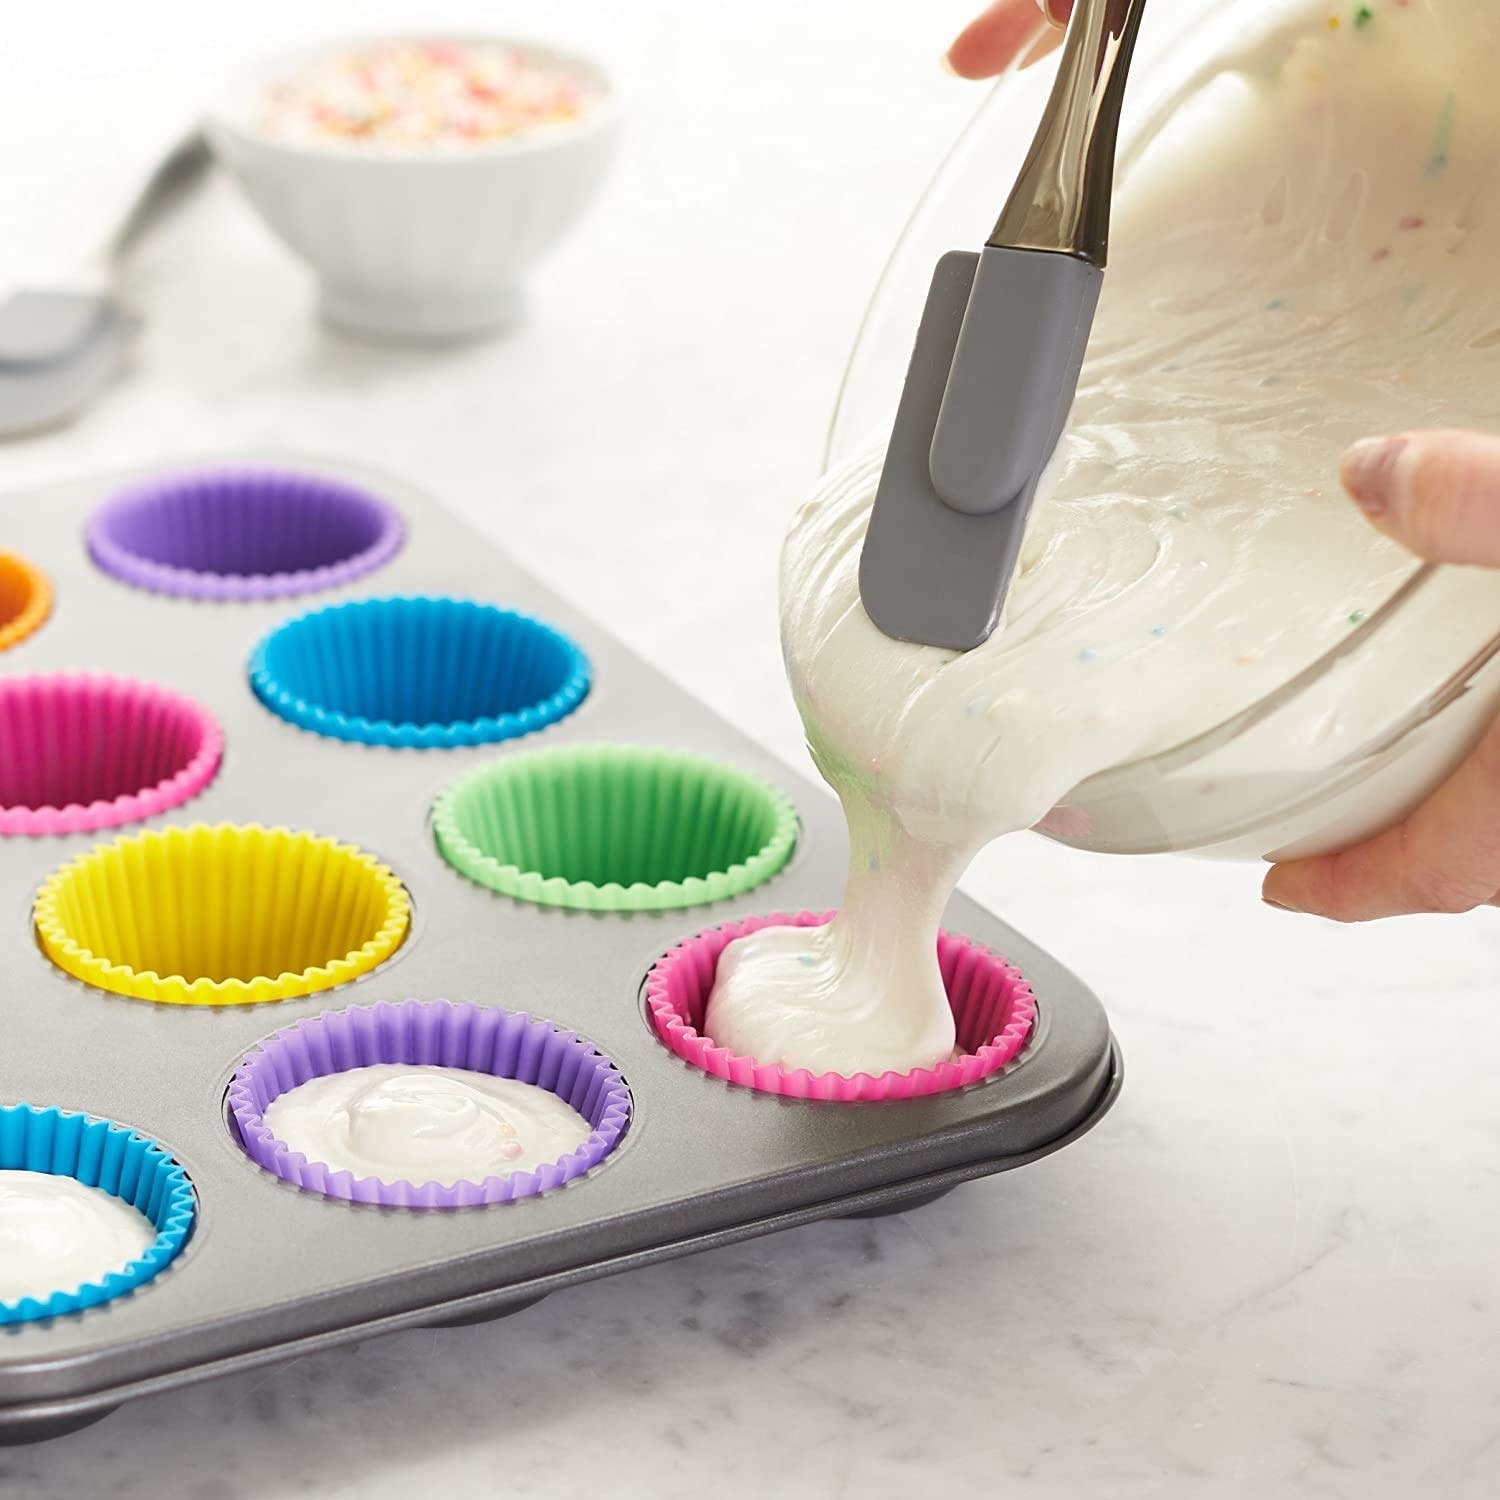 A person&#x27;s hand pouring cake batter into the cupcake moulds.